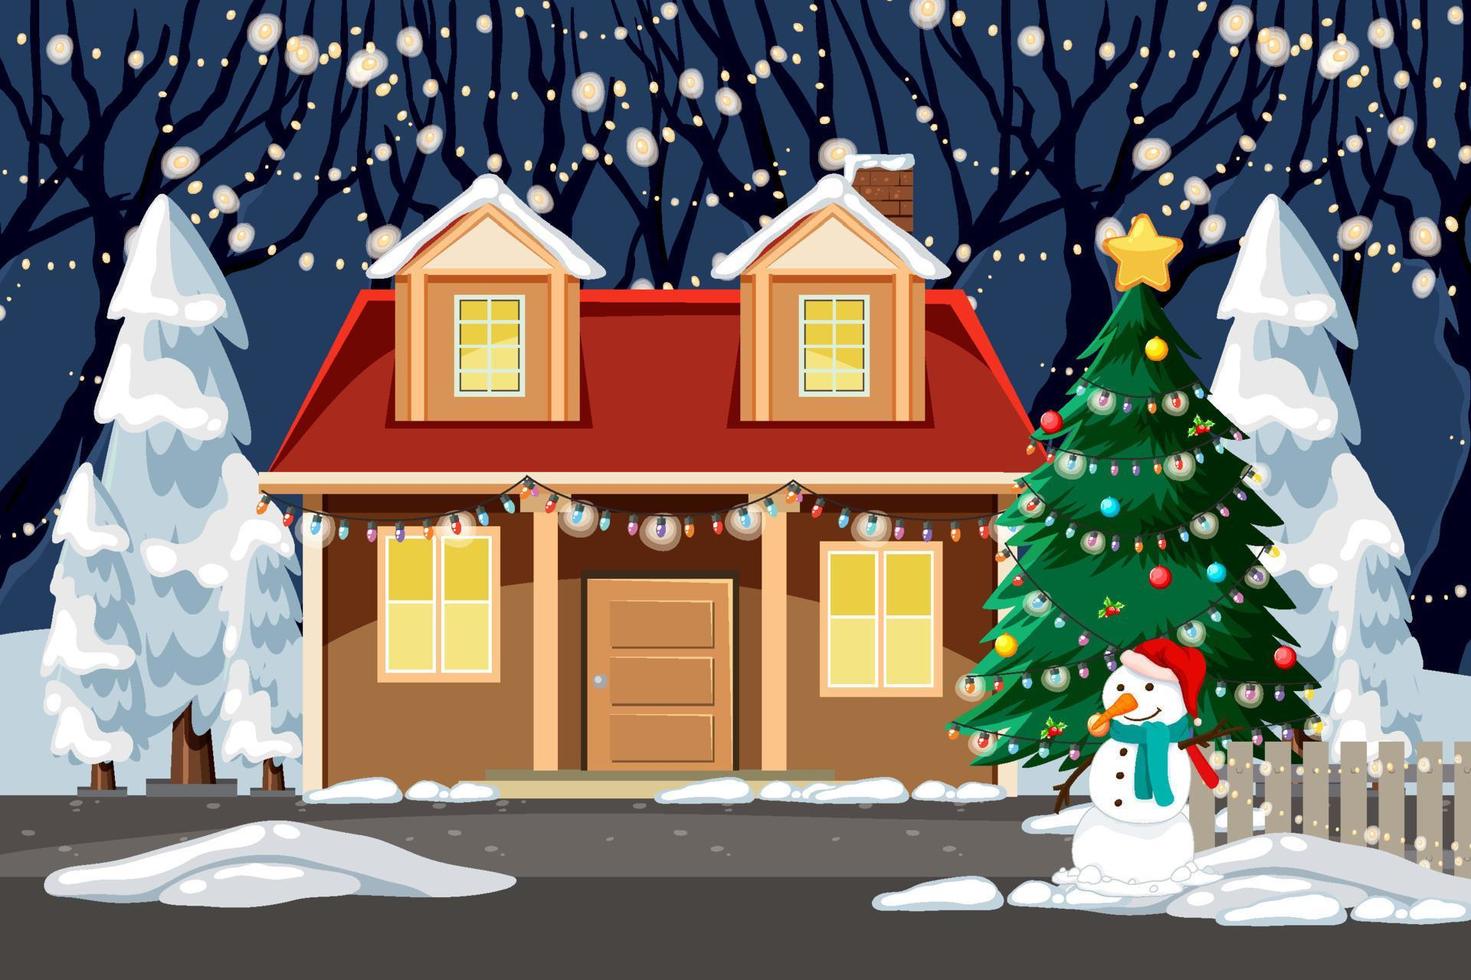 Outdoor Christmas house at night scene vector